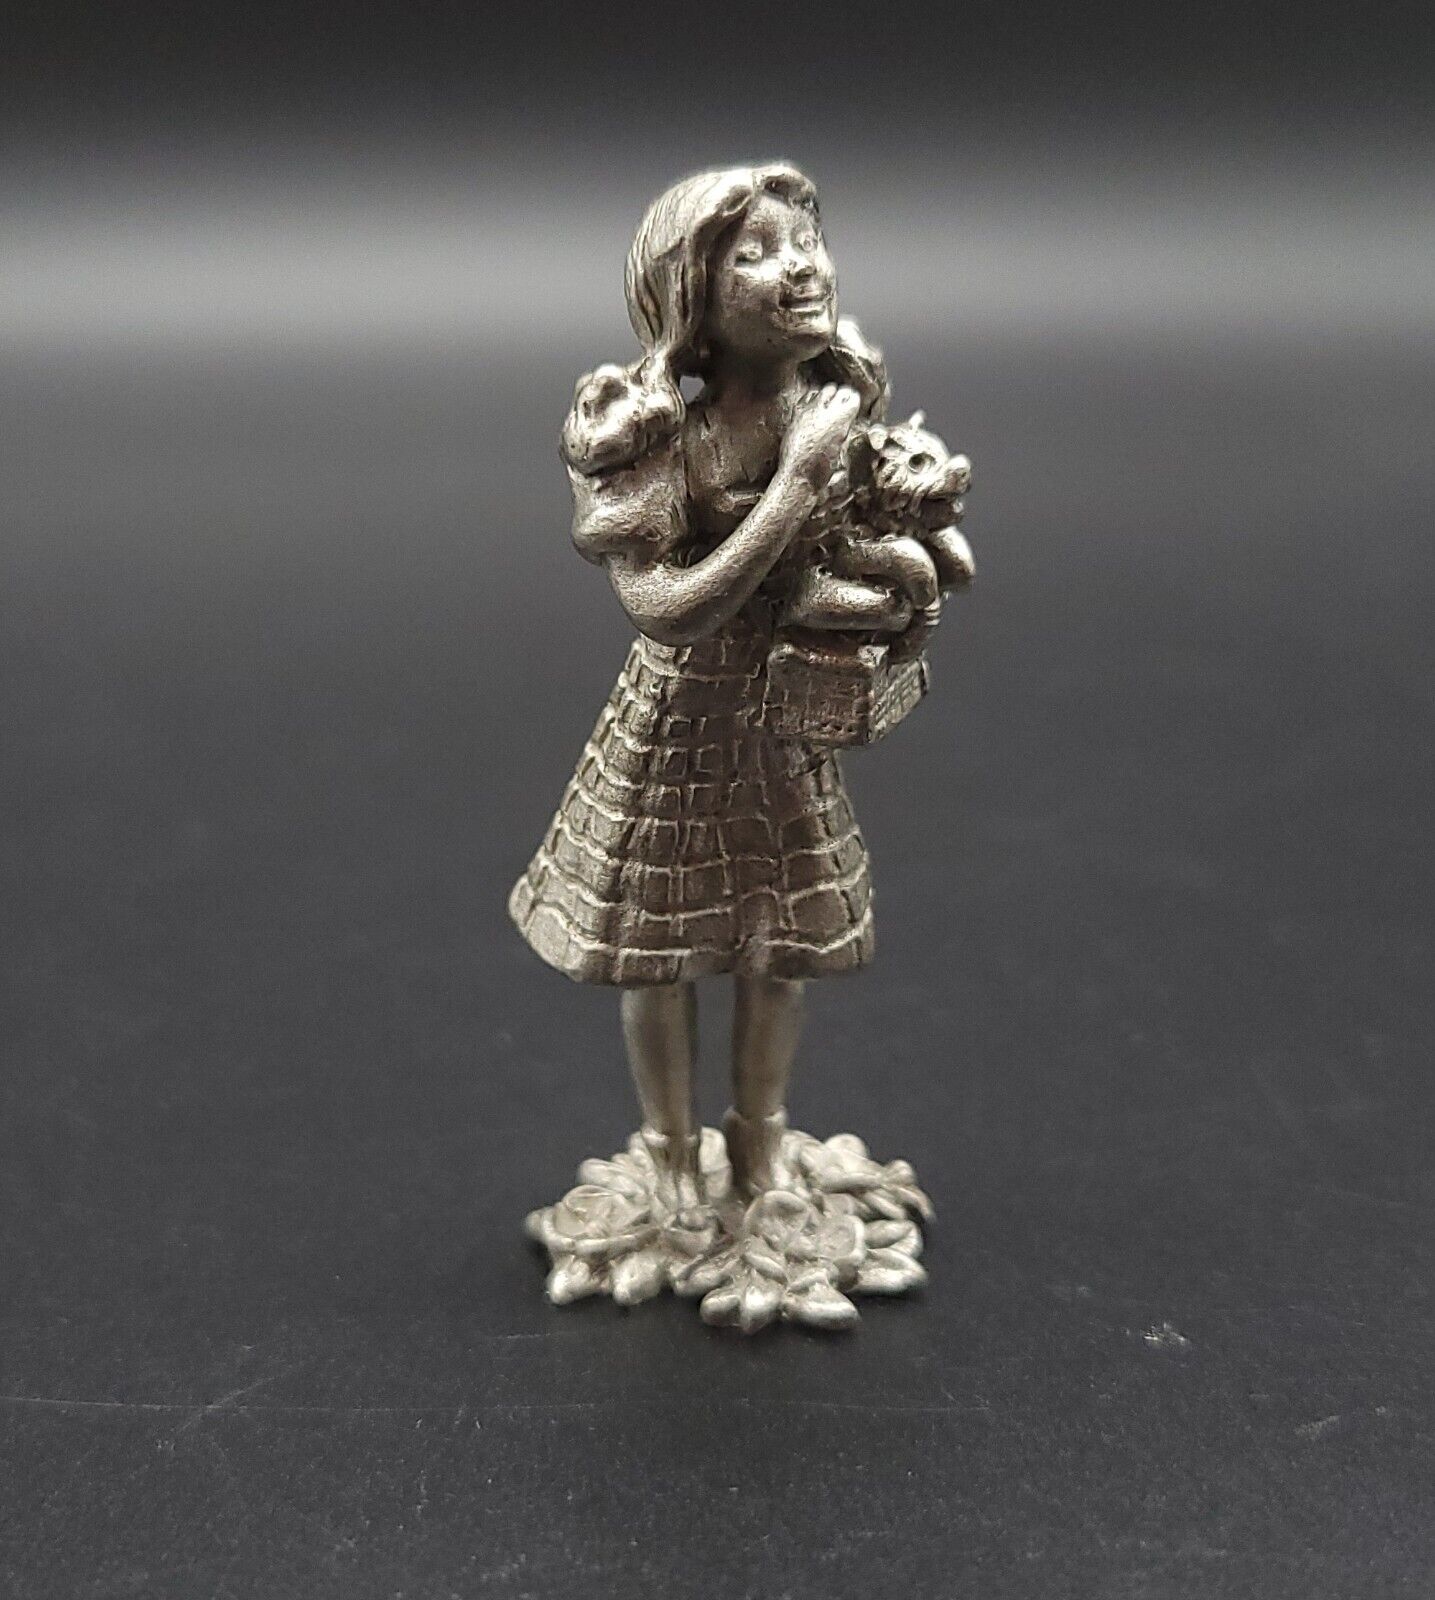 Dorothy Wizard of Oz Comstock Pewter Figurine - Used